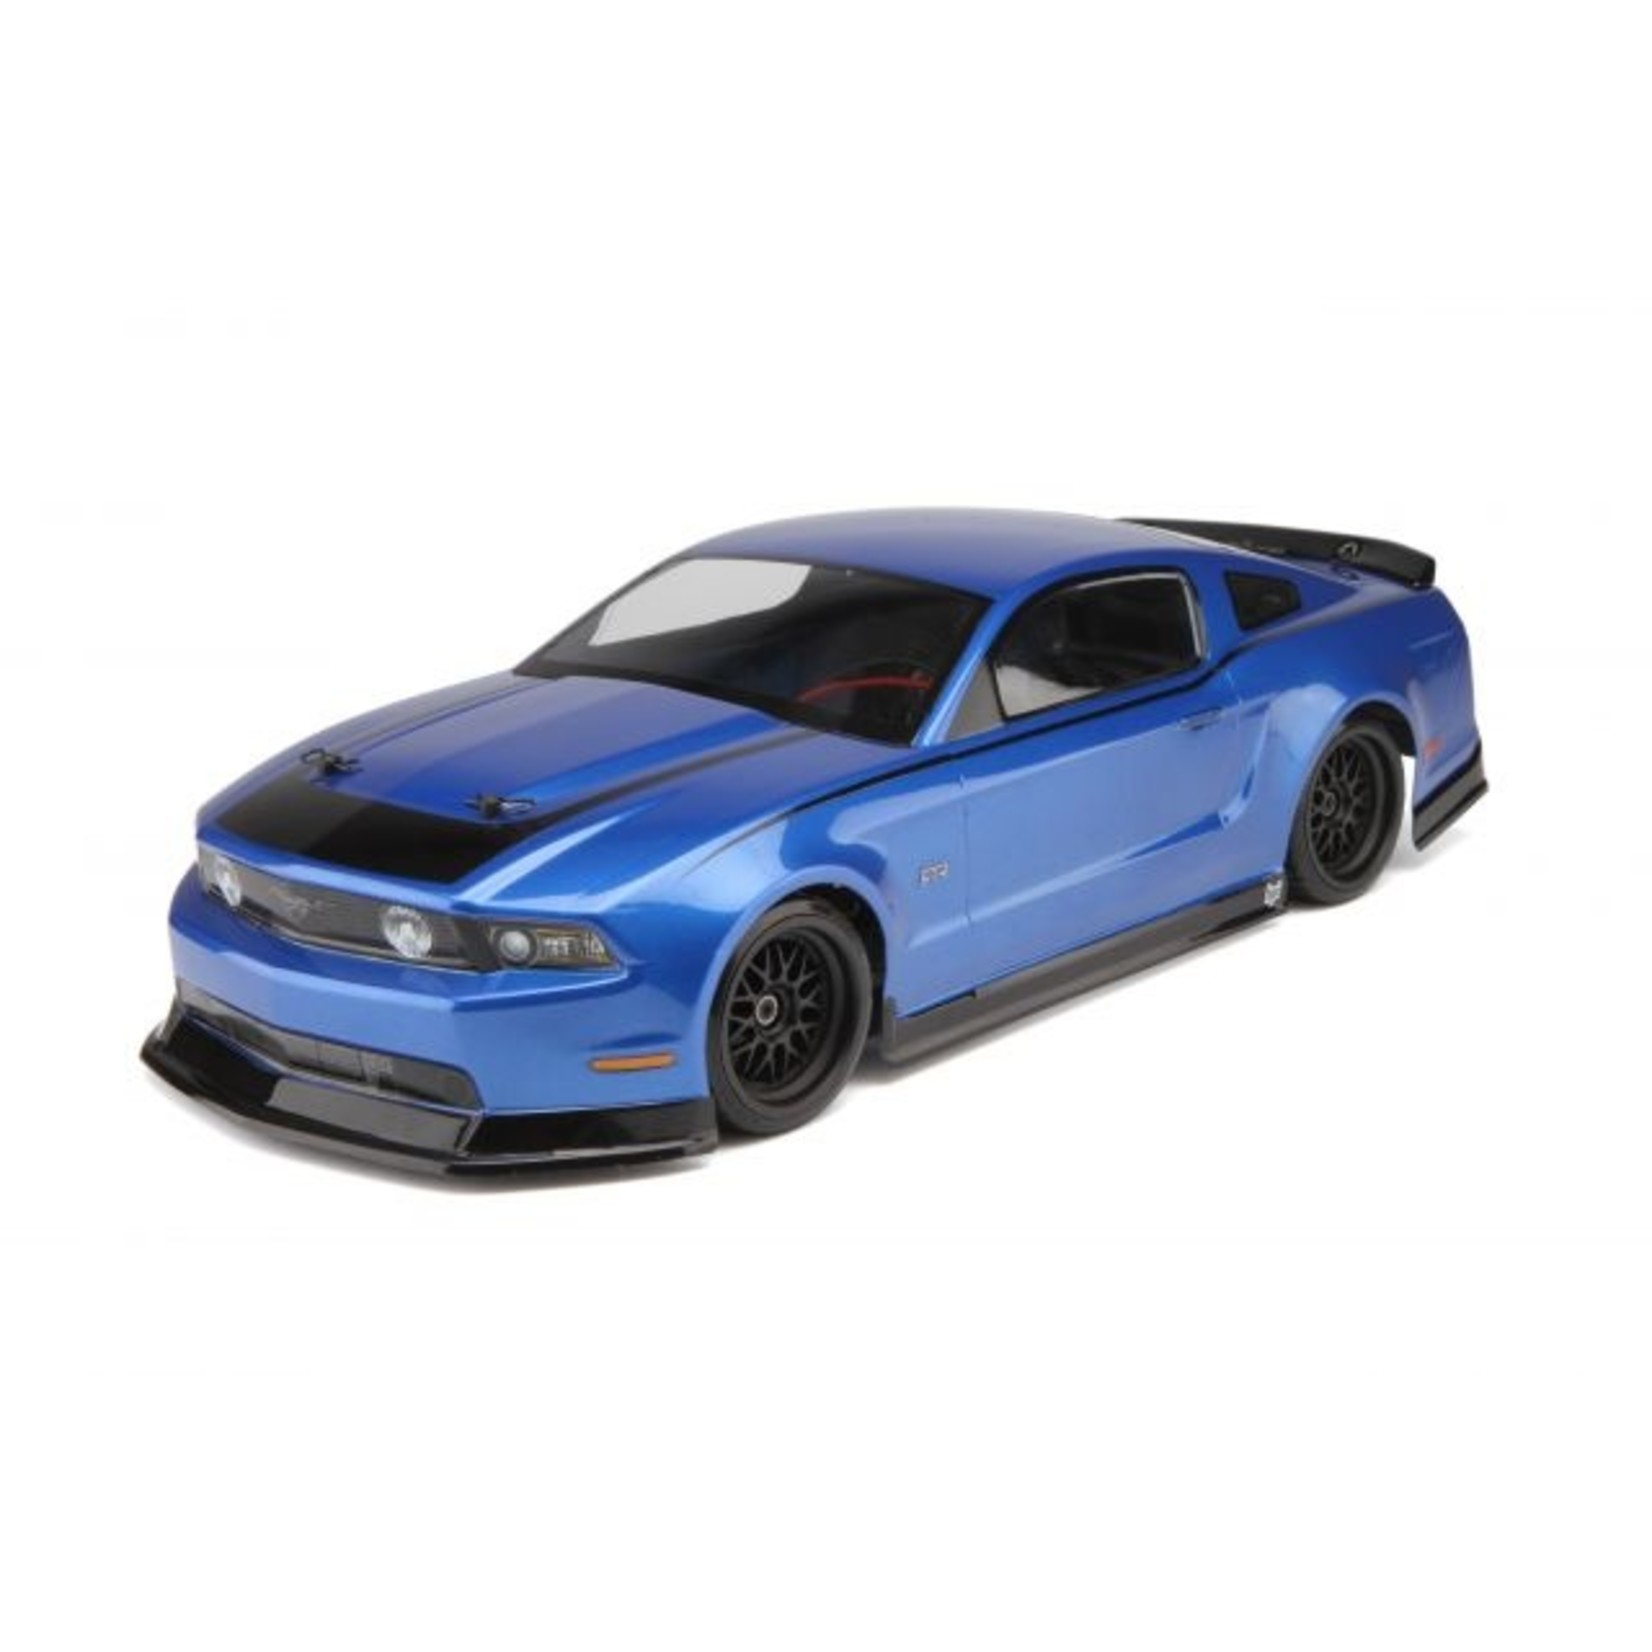 HPI Racing HPI106108 - 2011 Ford Mustang Body (200mm)